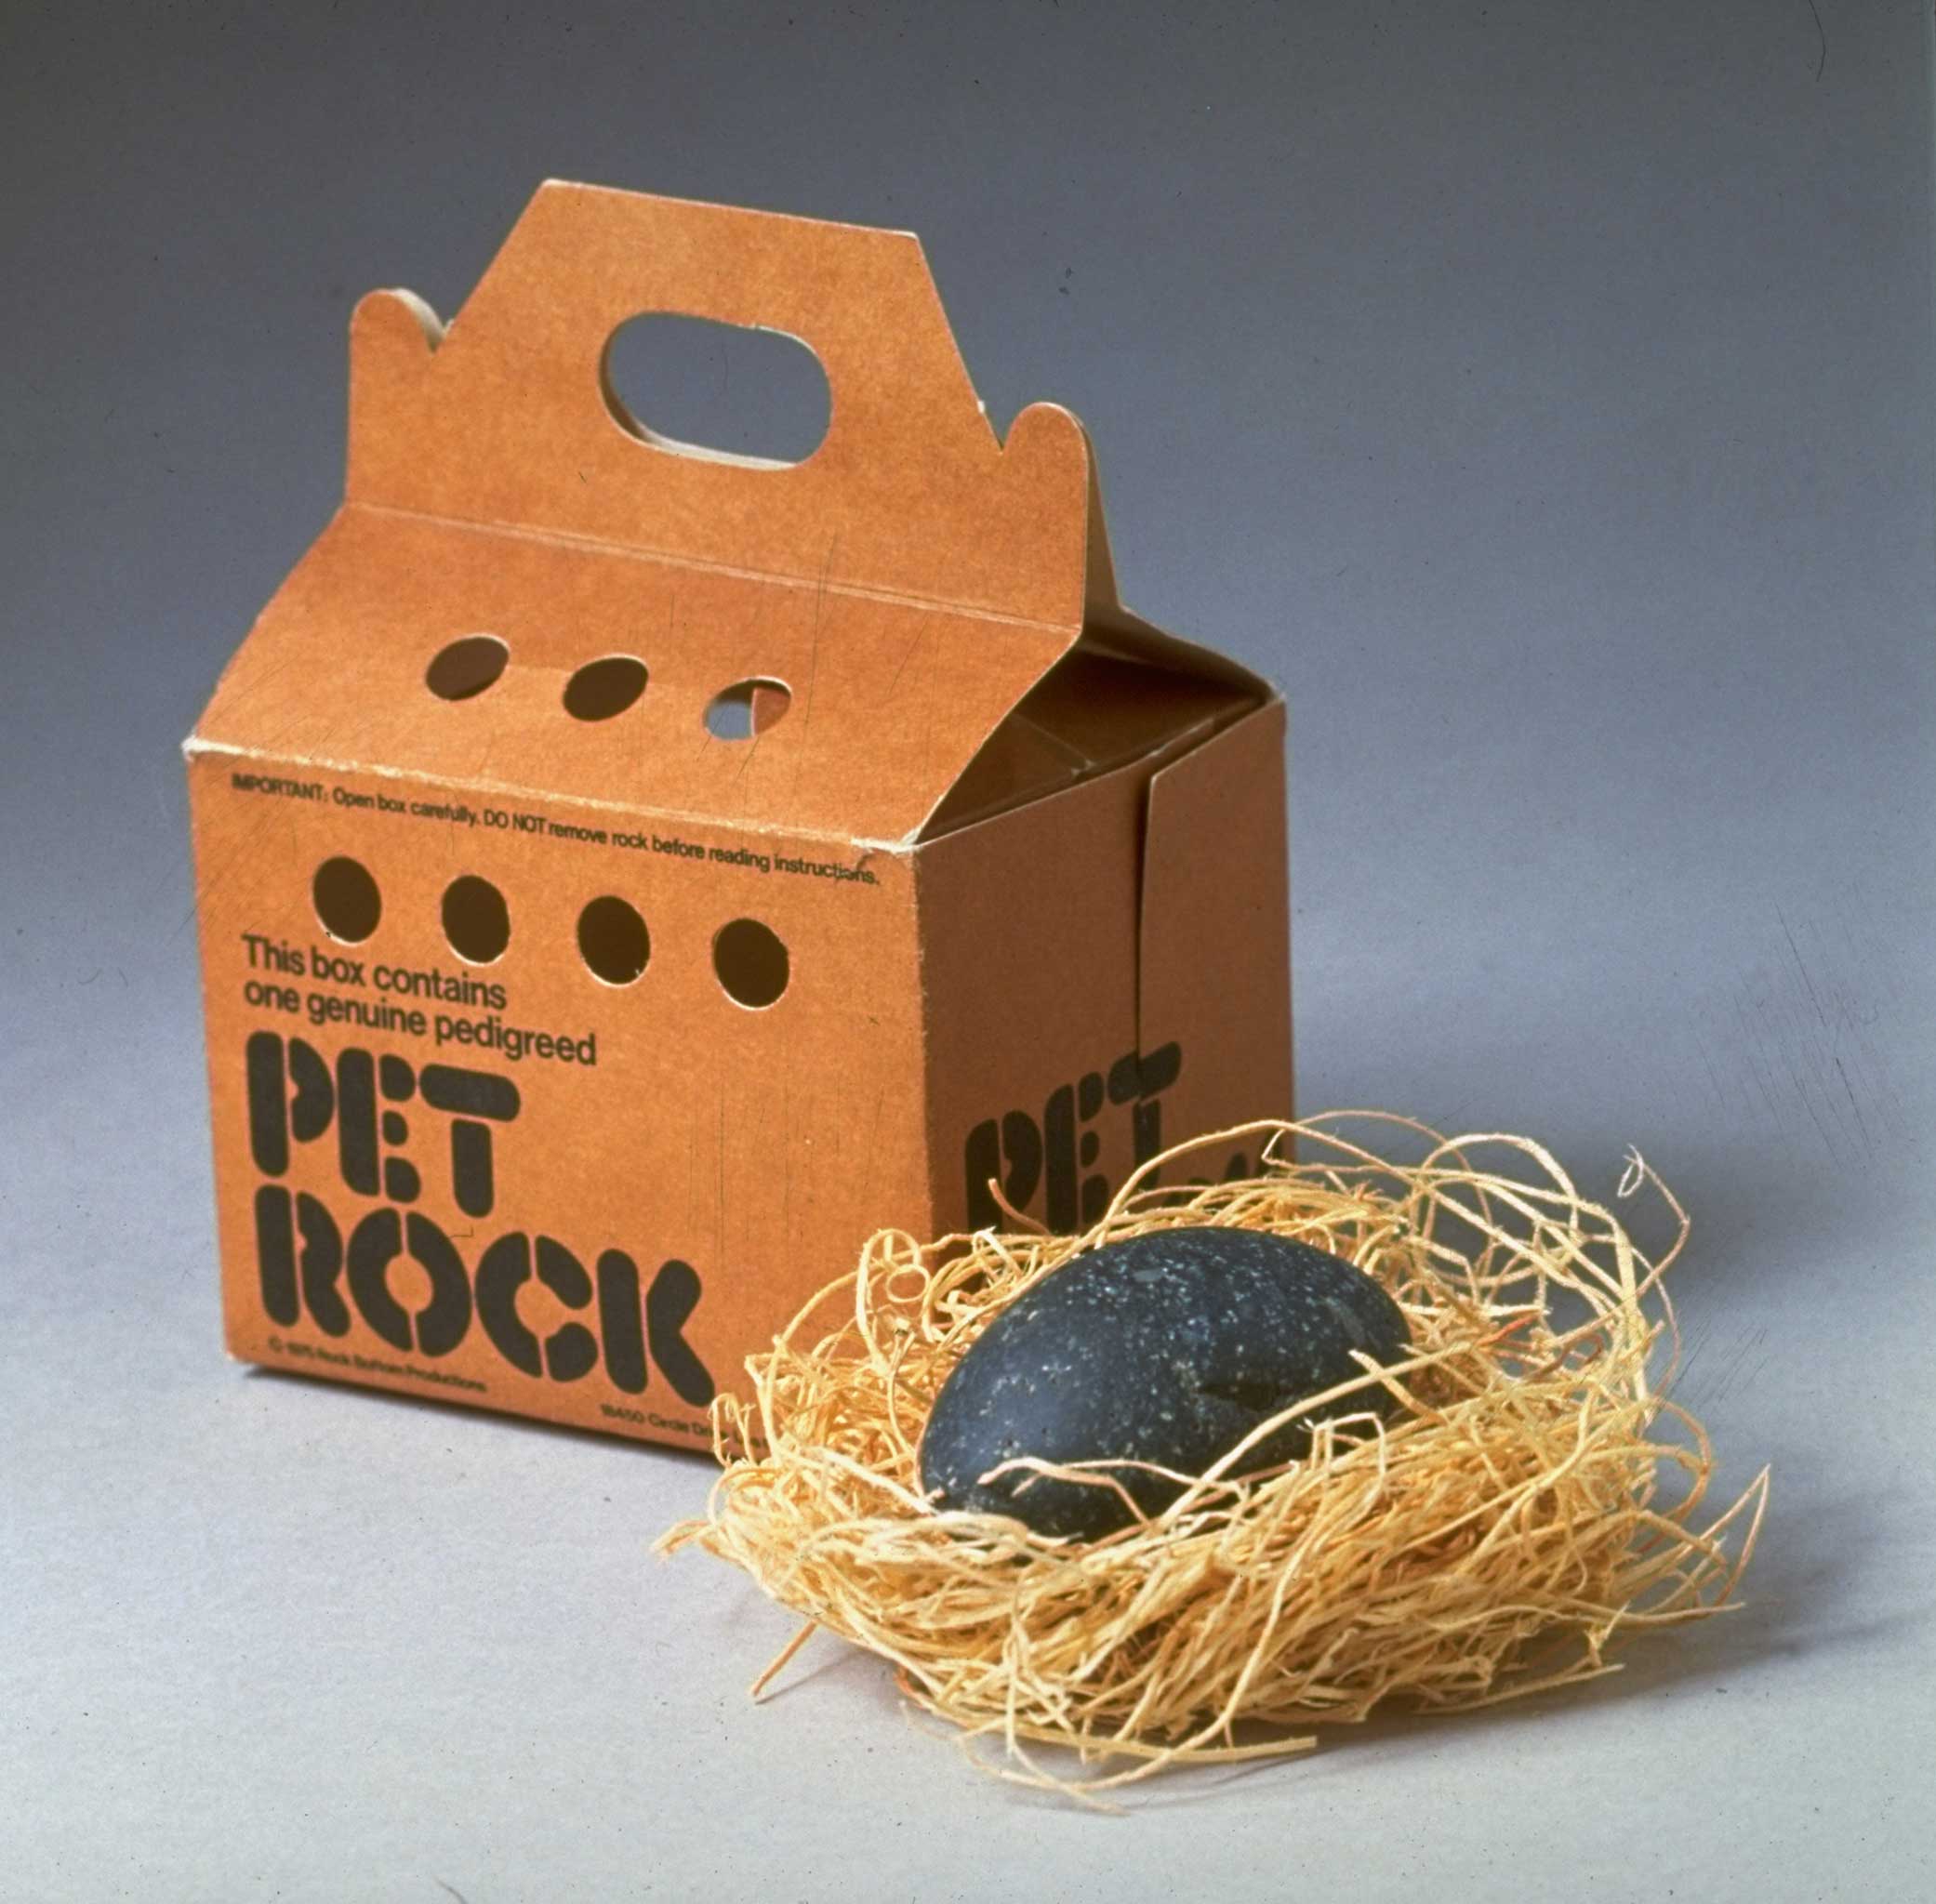 Product shot of Pet Rock, fad from mid-1